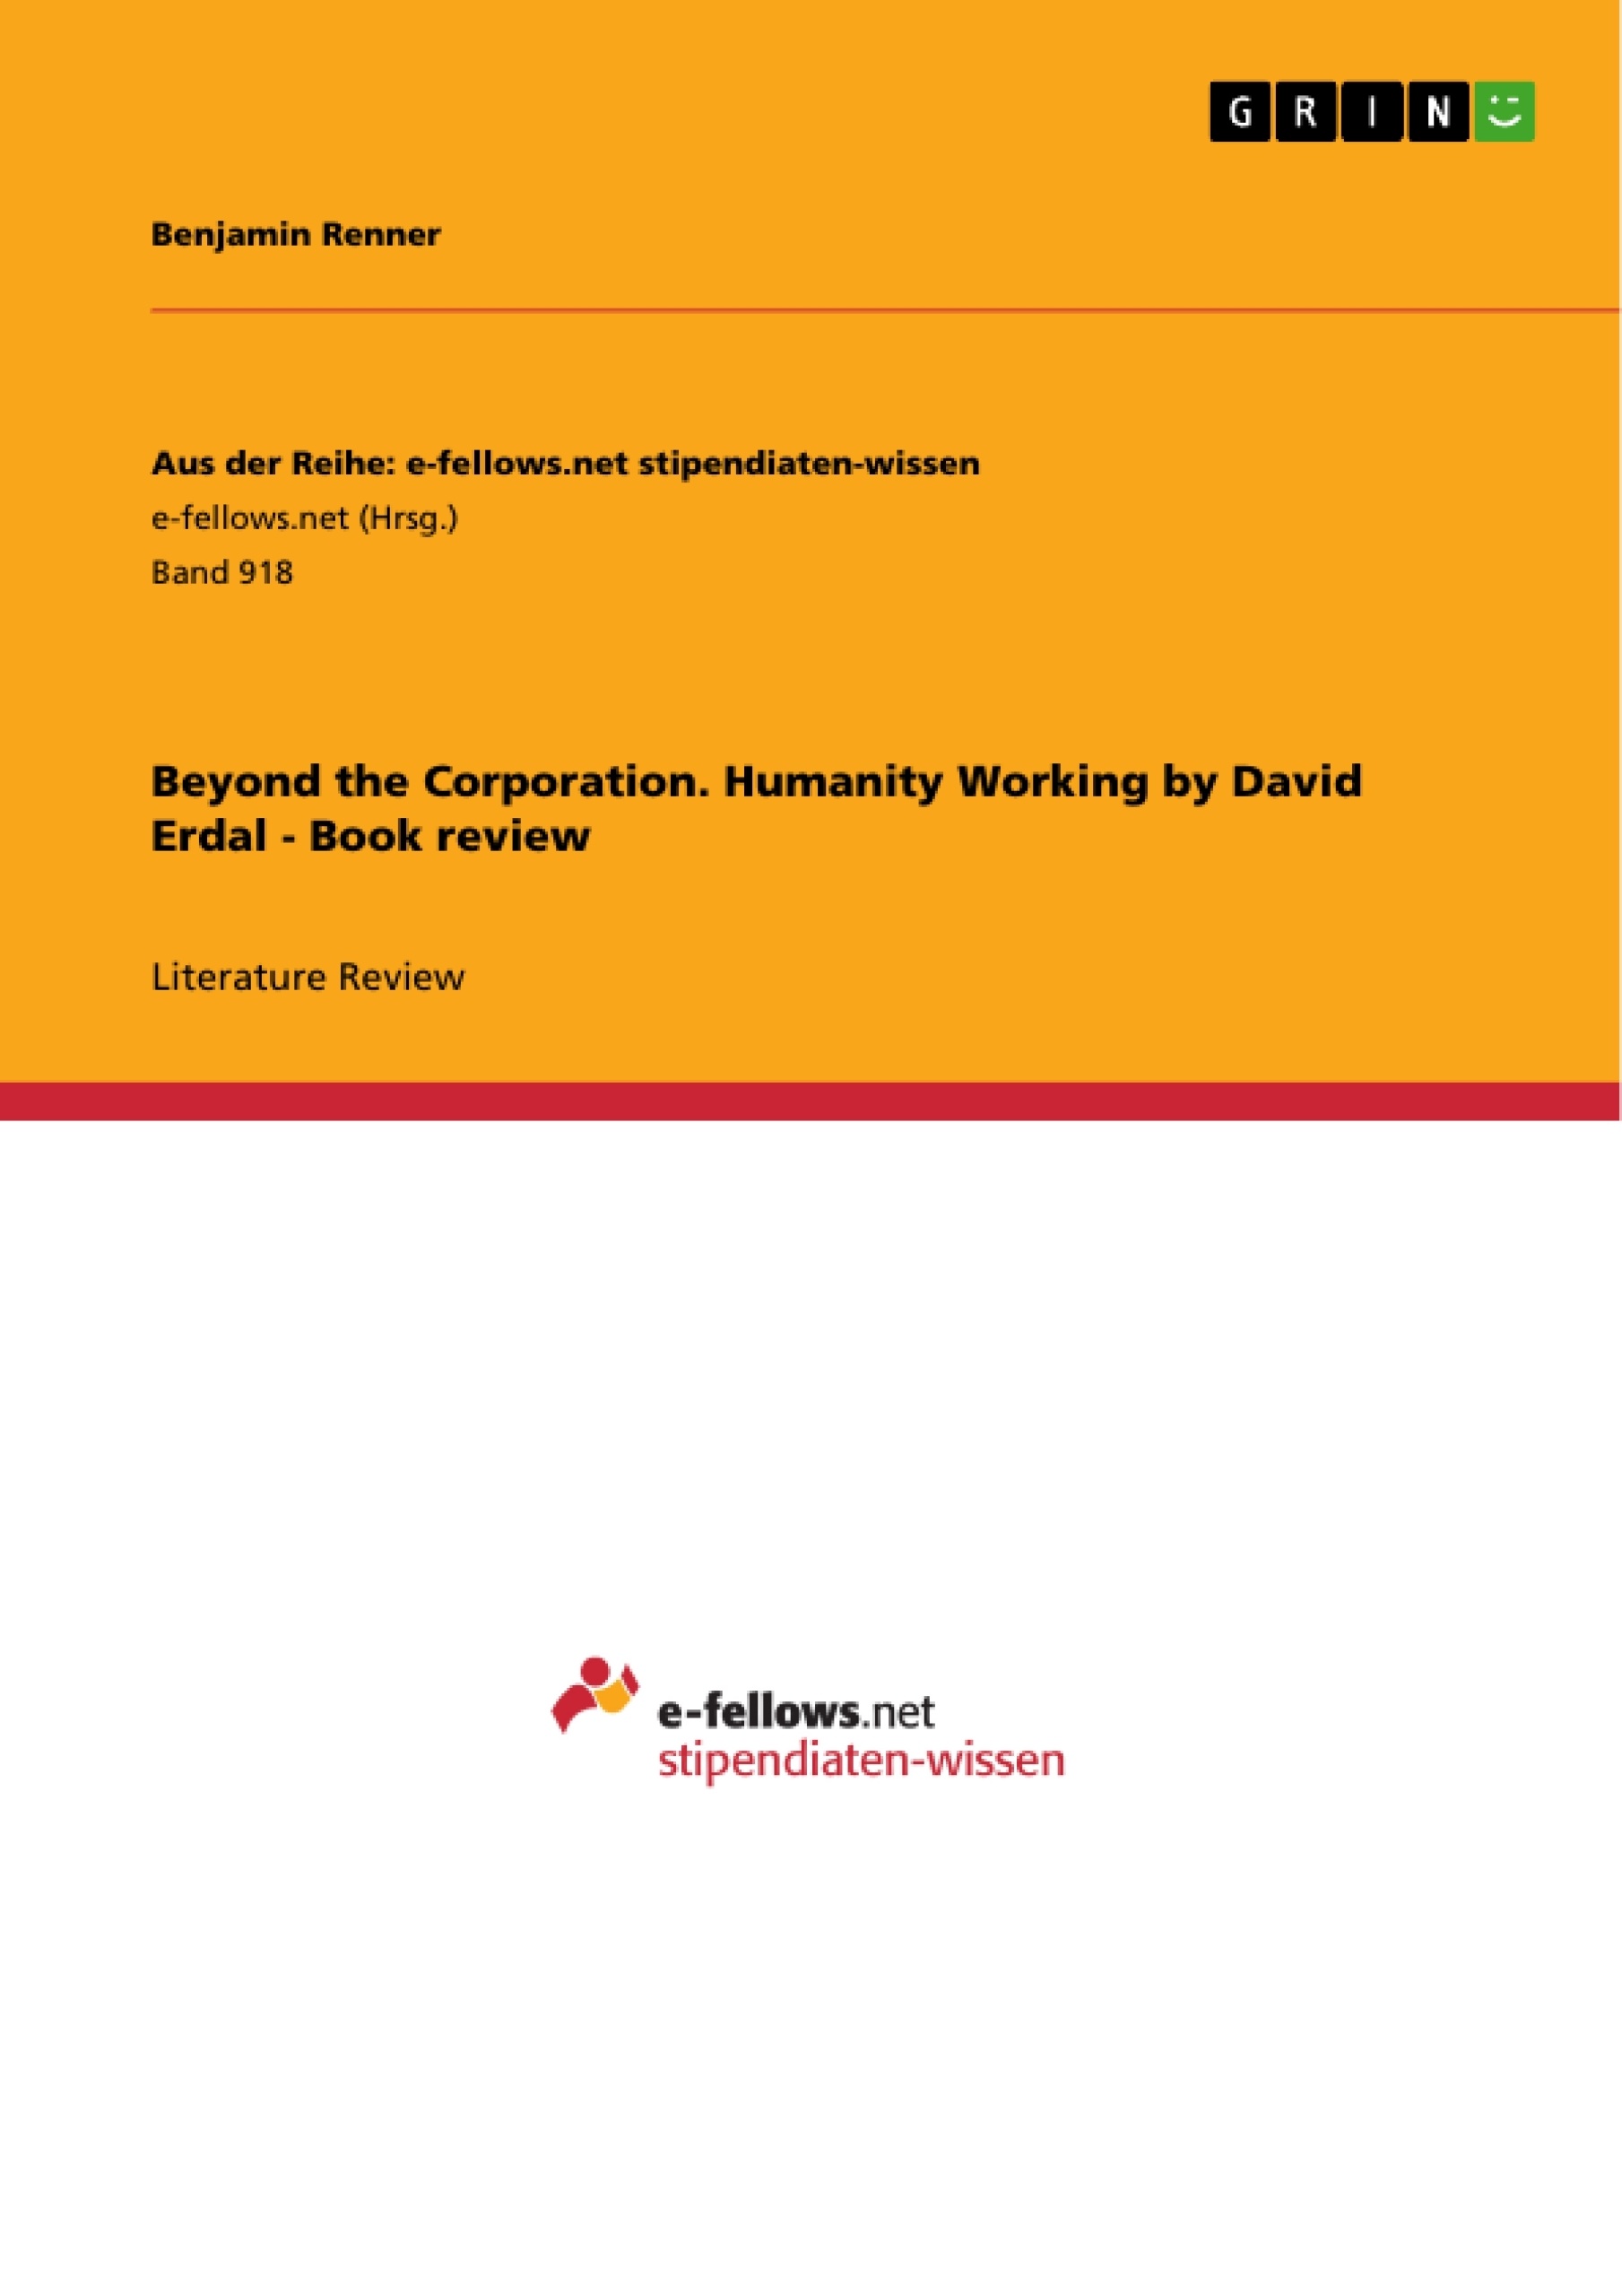 Title: Beyond the Corporation. Humanity Working by David Erdal - Book review